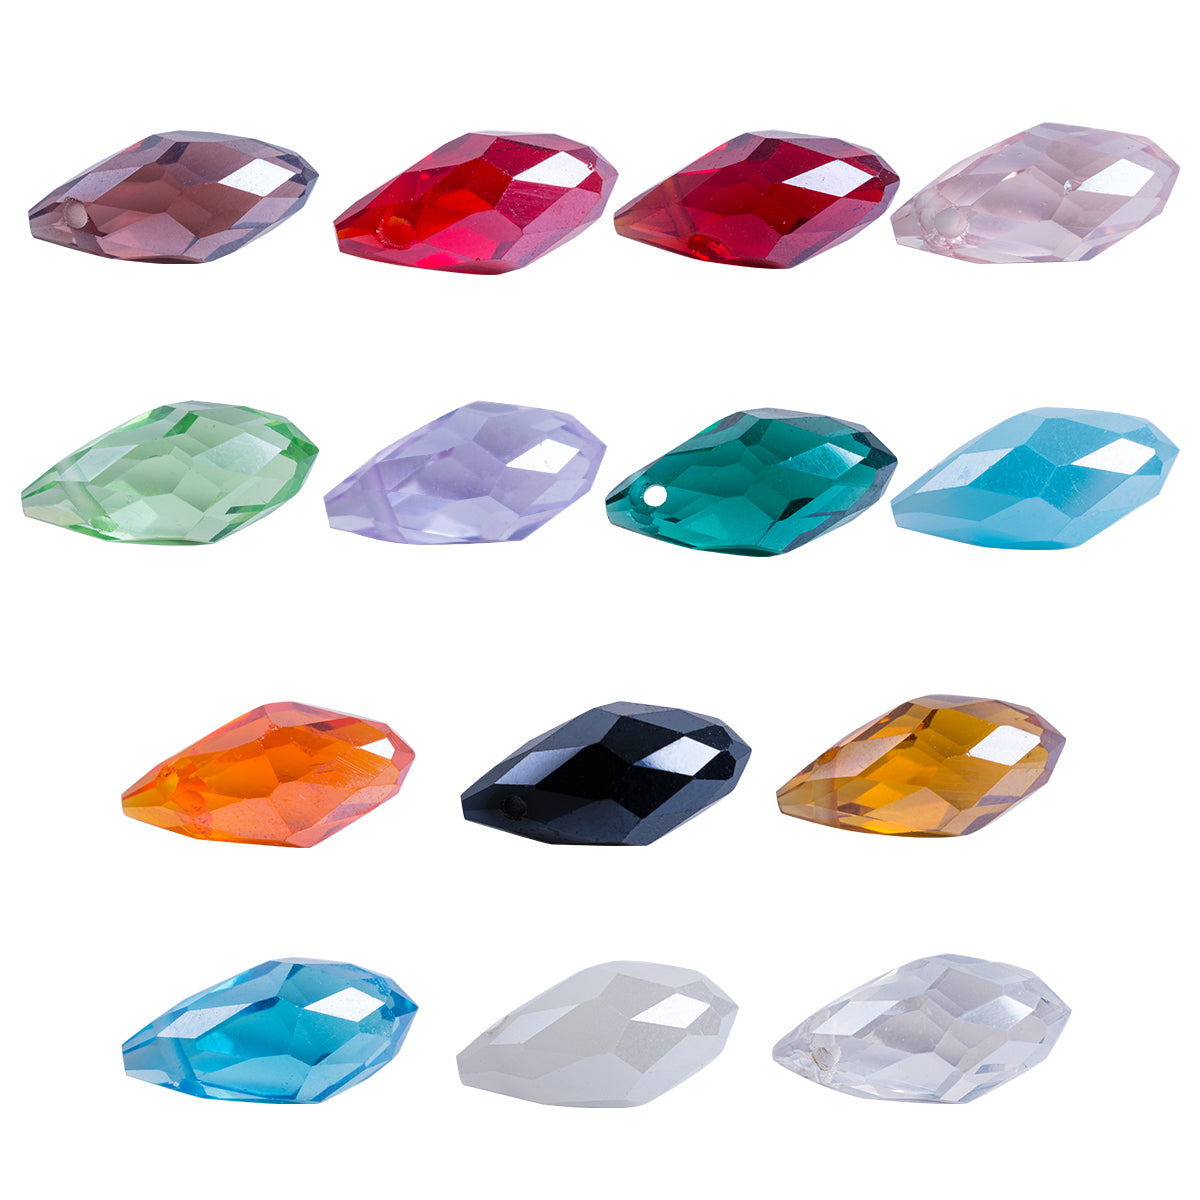 6x12mm Crystal Teardrop Shaped Beads for DIY Beading Projects (280 pcs)